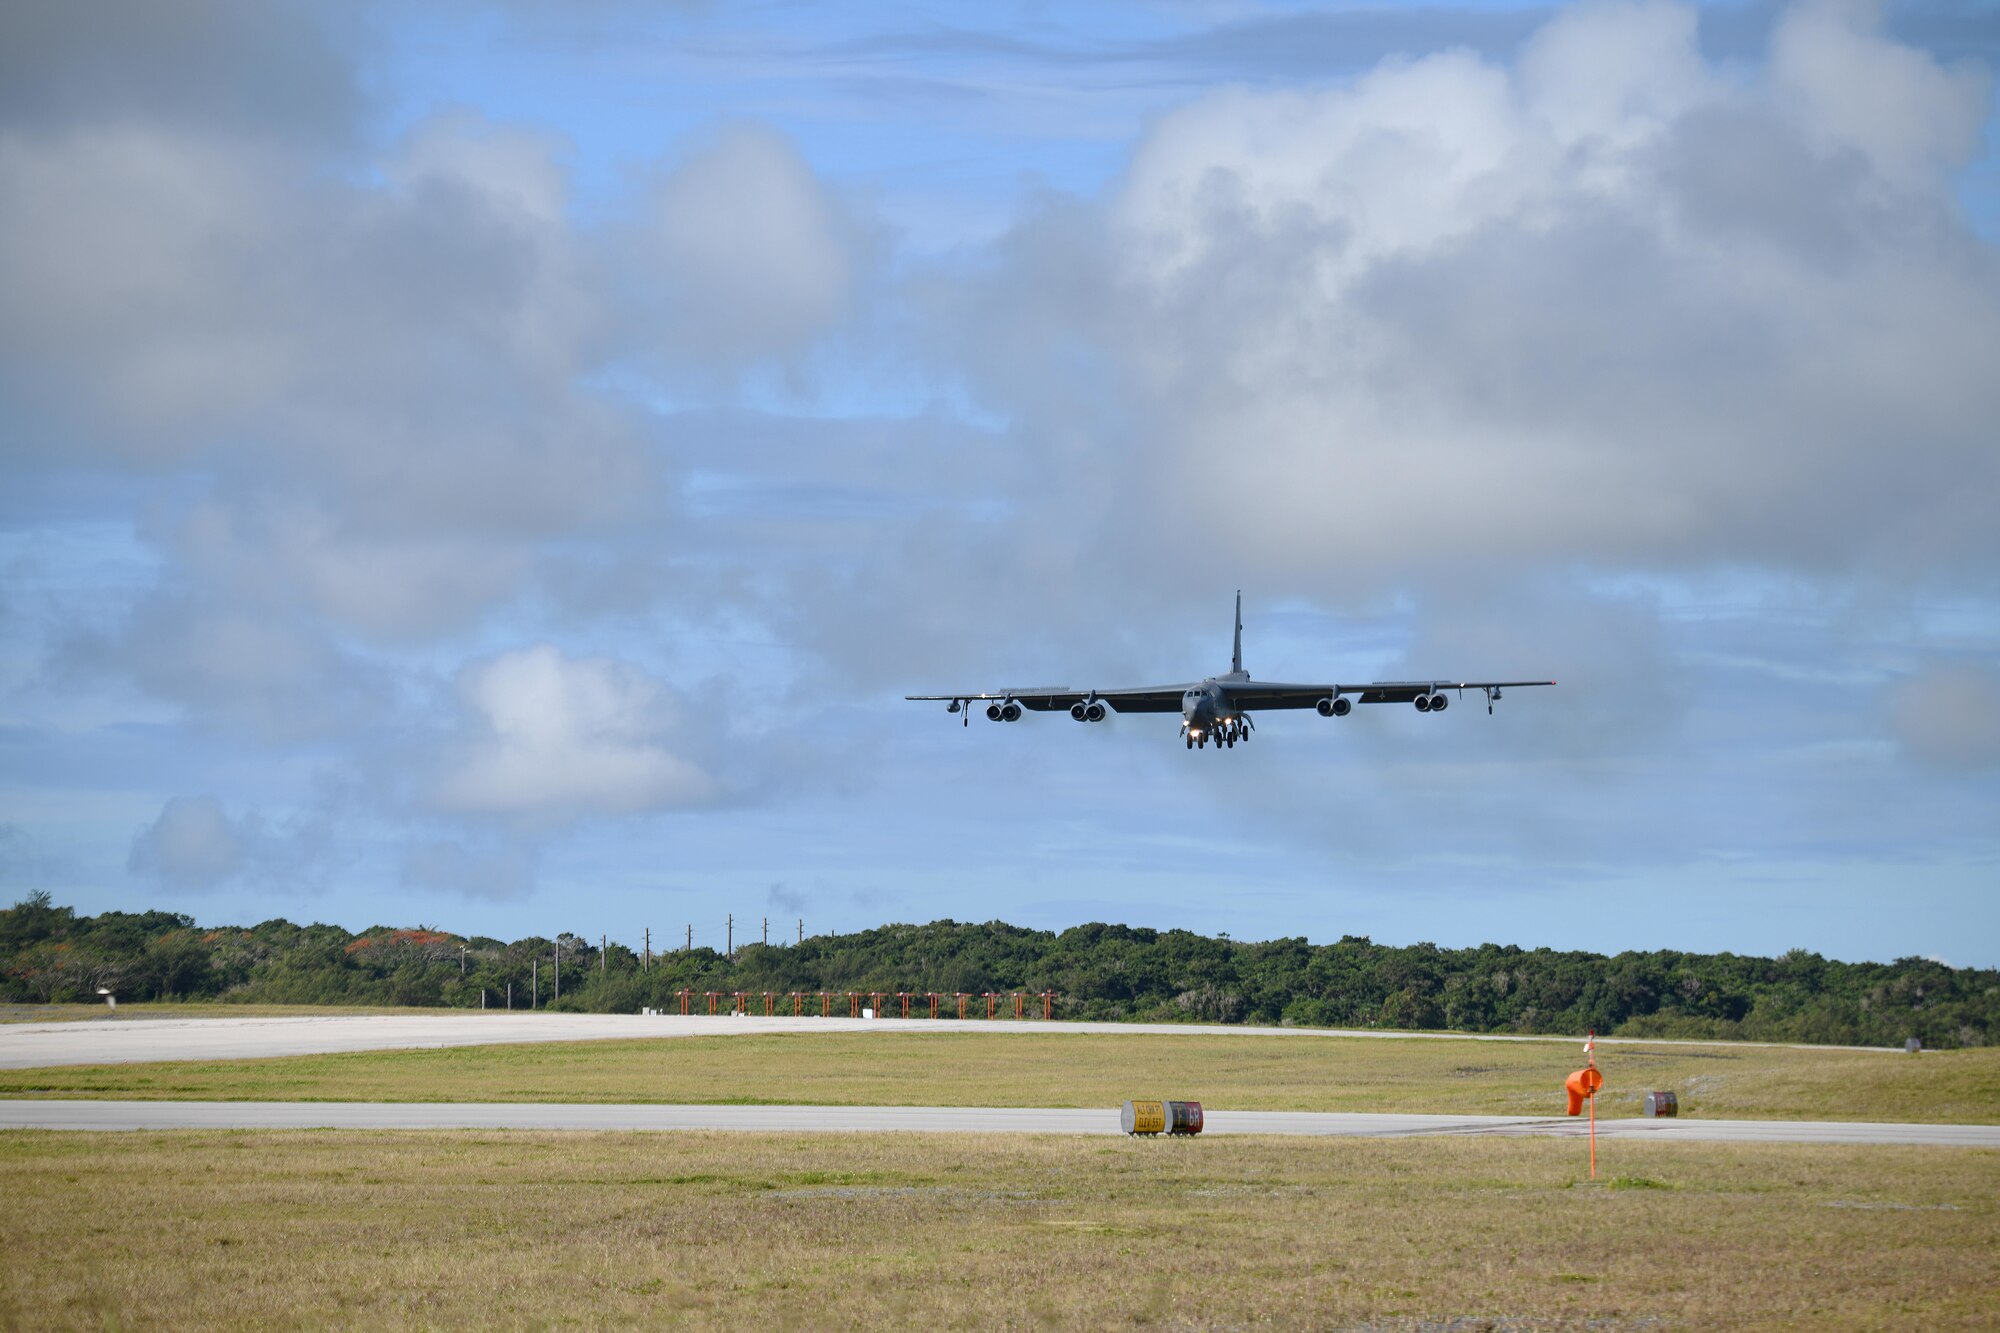 A B-52 Stratofortress assigned to Barksdale Air Force Base, La., arrives at Andersen Air Force Base, Guam, in support of a Bomber Task Force deployment, Jan. 26, 2020. The aircraft, from the 96th Bomb Squadron at Barksdale AFB, La., deployed in support of Pacific Air Forces’ training efforts with allies, partners and joint forces.